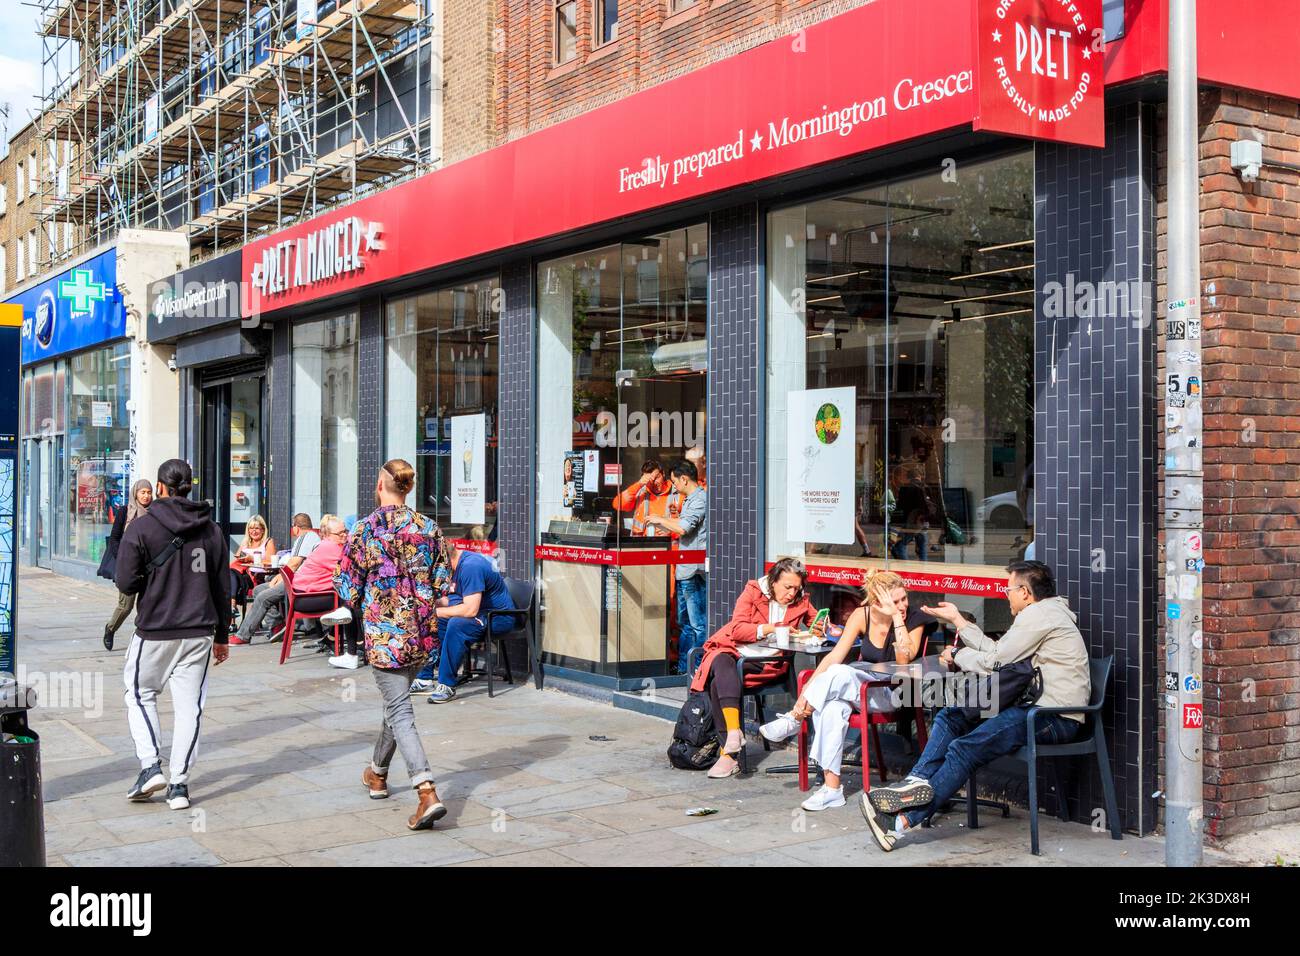 People seated outside Pret a Manger on Camden High Street, London, UK Stock Photo